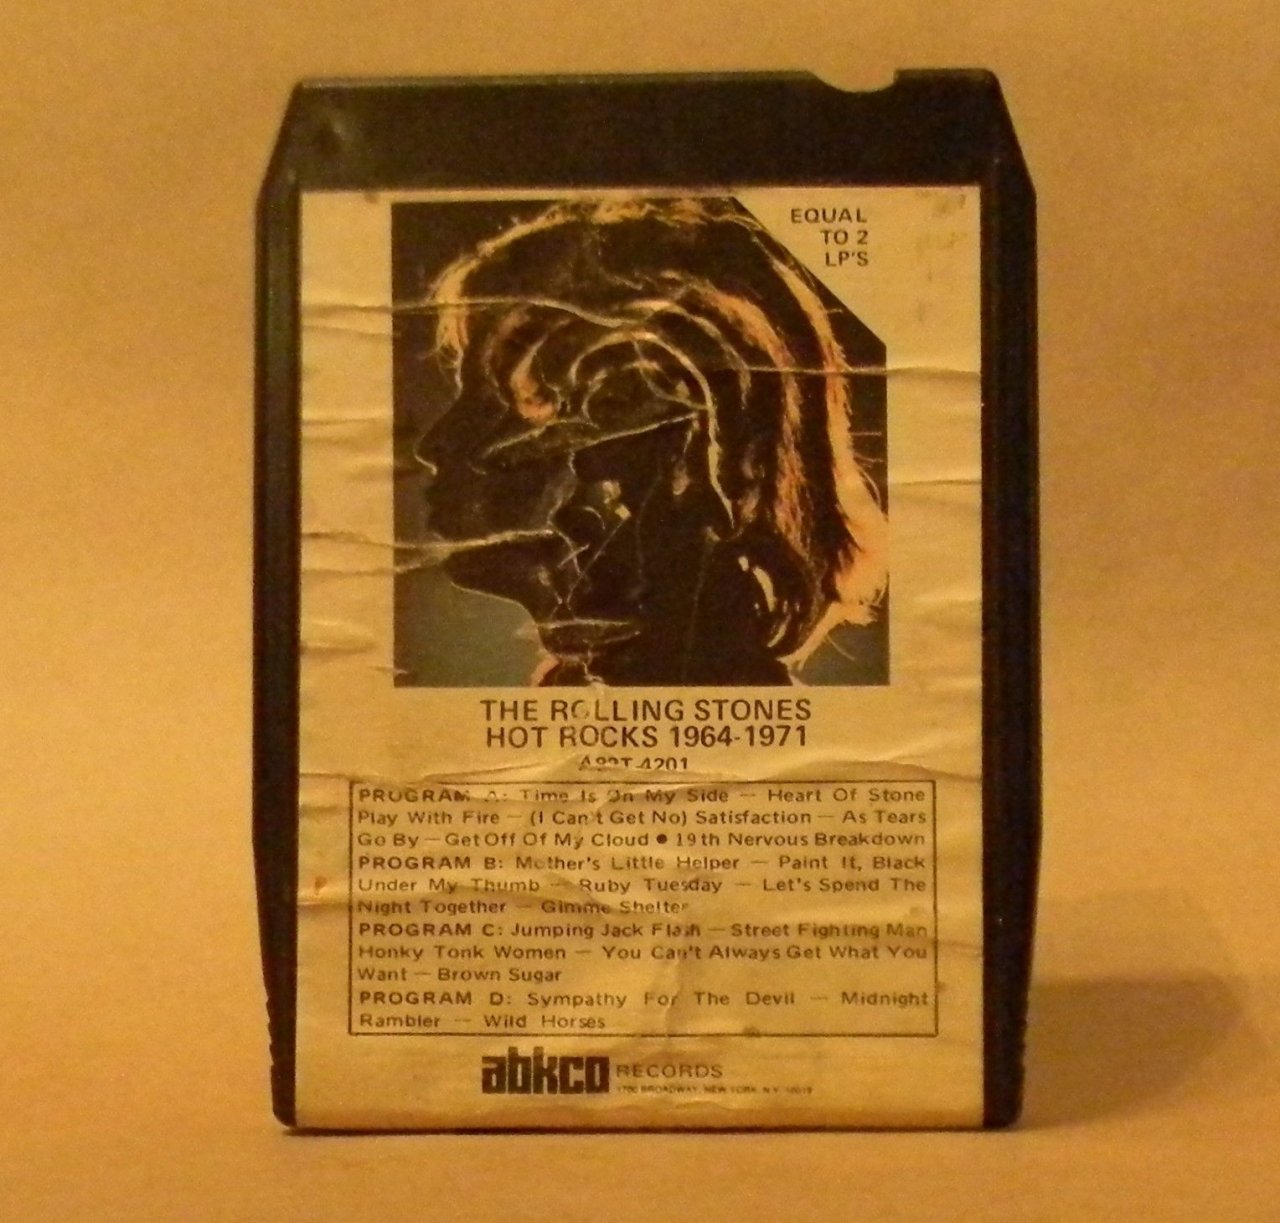 the-rolling-stones-hot-rocks-8-track-tape-tested-working-4d37f1ae056278bd26f63985537bcbd8.jpg